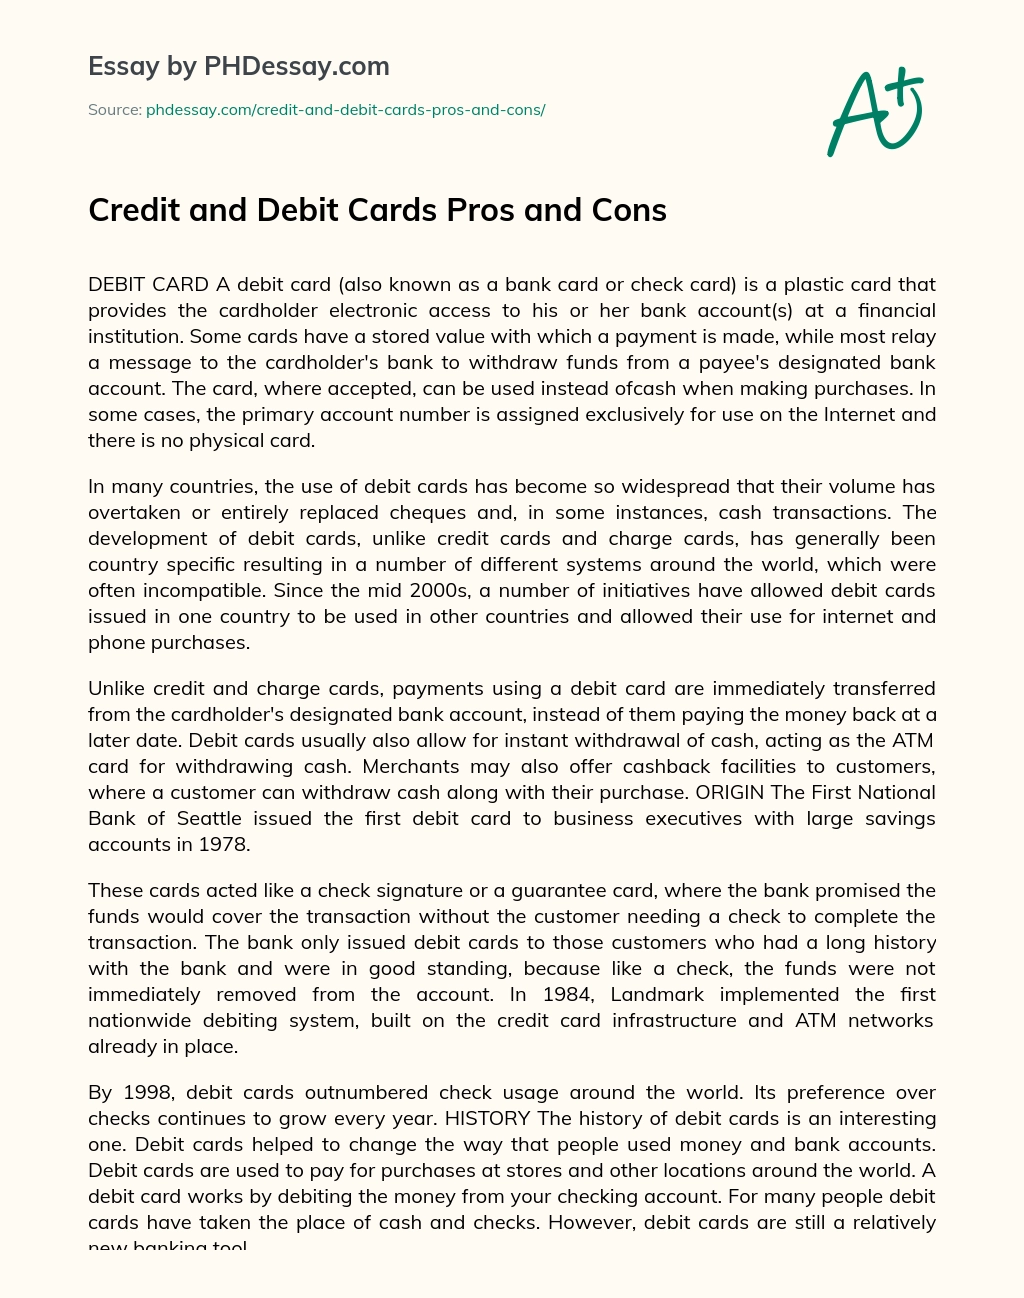 Credit and Debit Cards Pros and Cons essay